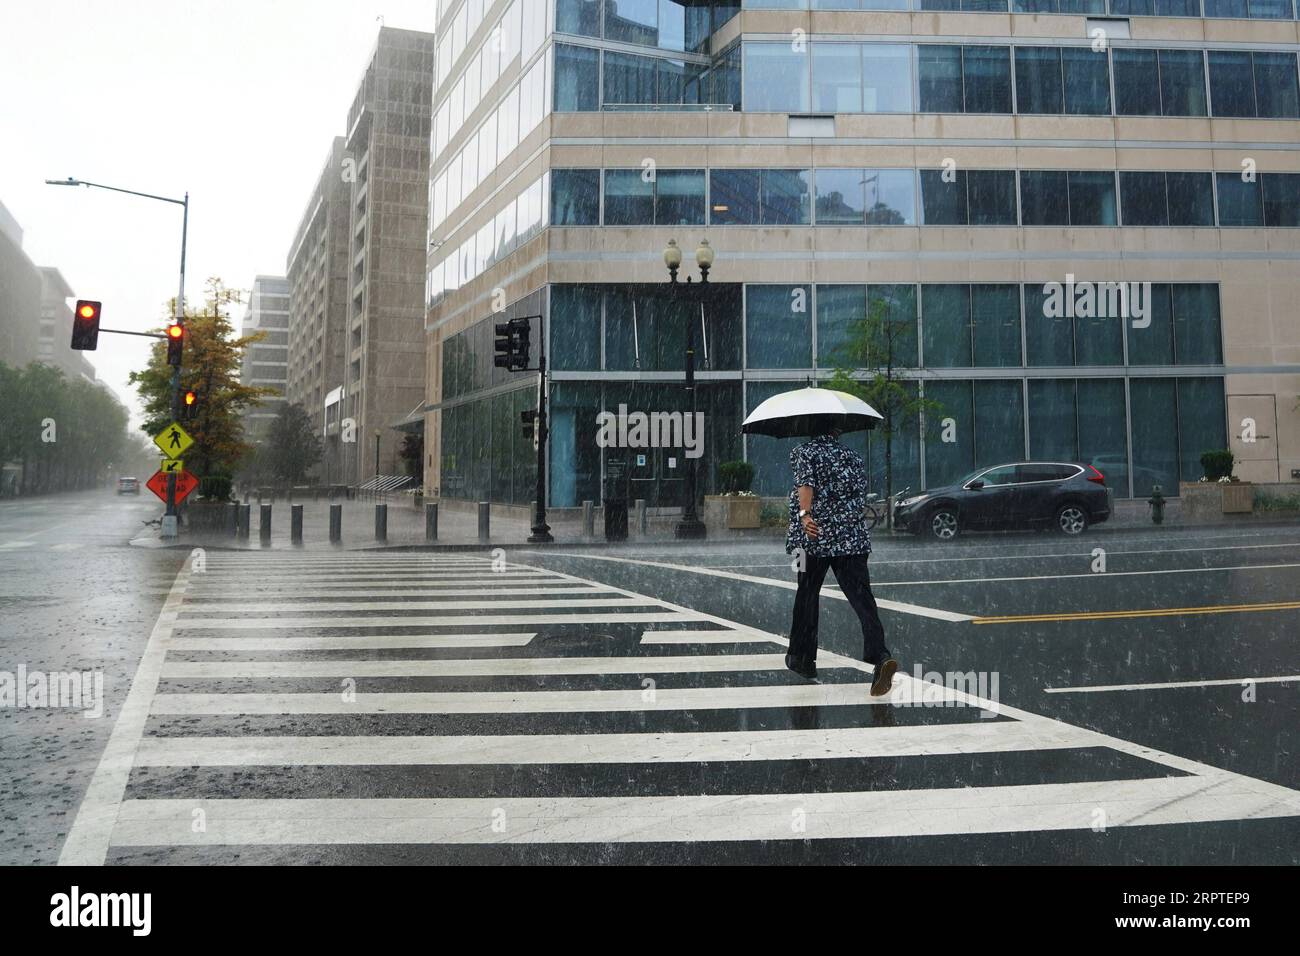 200415 -- BEIJING, April 15, 2020 -- A man crosses a road in the rain near the International Monetary Fund IMF Headquarters in Washington D.C., the United States, April 13, 2020. The global economy is on track to contract sharply by 3 percent in 2020 as a result of the COVID-19 pandemic, much worse than during the 2008-09 financial crisis, according to the International Monetary Fund IMF s World Economic Outlook released Tuesday.  XINHUA PHOTOS OF THE DAY LiuxJie PUBLICATIONxNOTxINxCHN Stock Photo